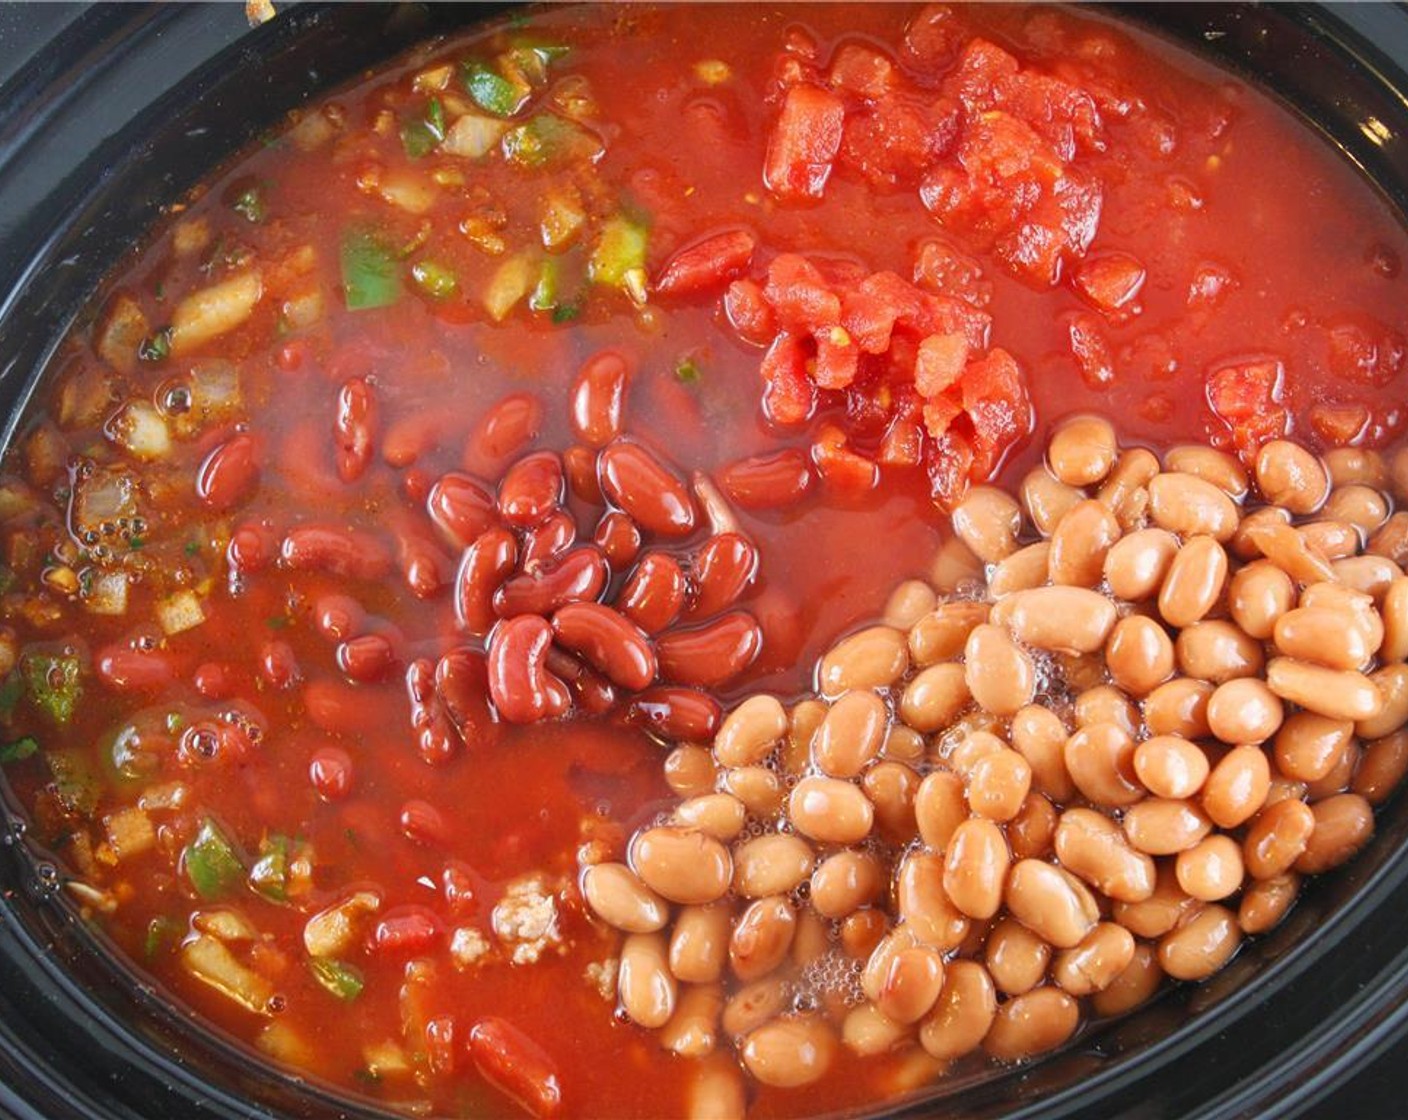 step 4 If cooking on the stovetop, add the cooked meat back to the skillet. If using a slow cooker, add meat-veggie mixture to the slow cooker. Add the Tomato Juice (46 fl oz), Canned Diced Tomatoes (3 1/2 cups), Tomato Sauce (1 3/4 cups), Canned Red Kidney Beans (2 1/2 cups) and Canned Pinto Beans (2 1/3 cups) to either the skillet or slow cooker, depending on which you are using.